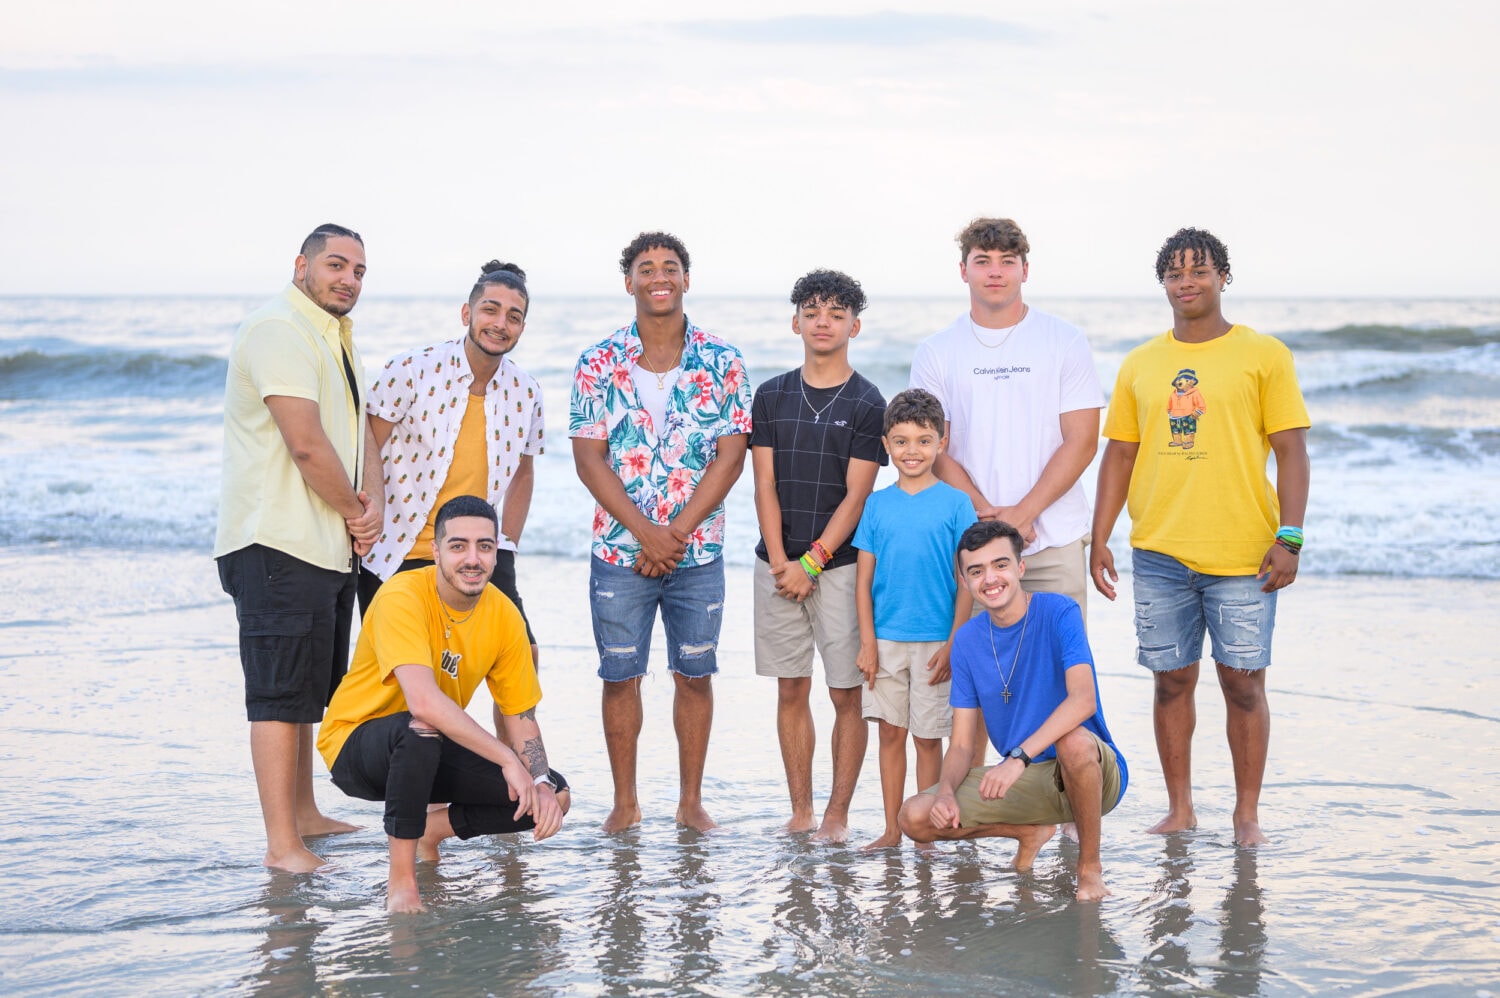 All the boys in front of the ocean - North Myrtle Beach